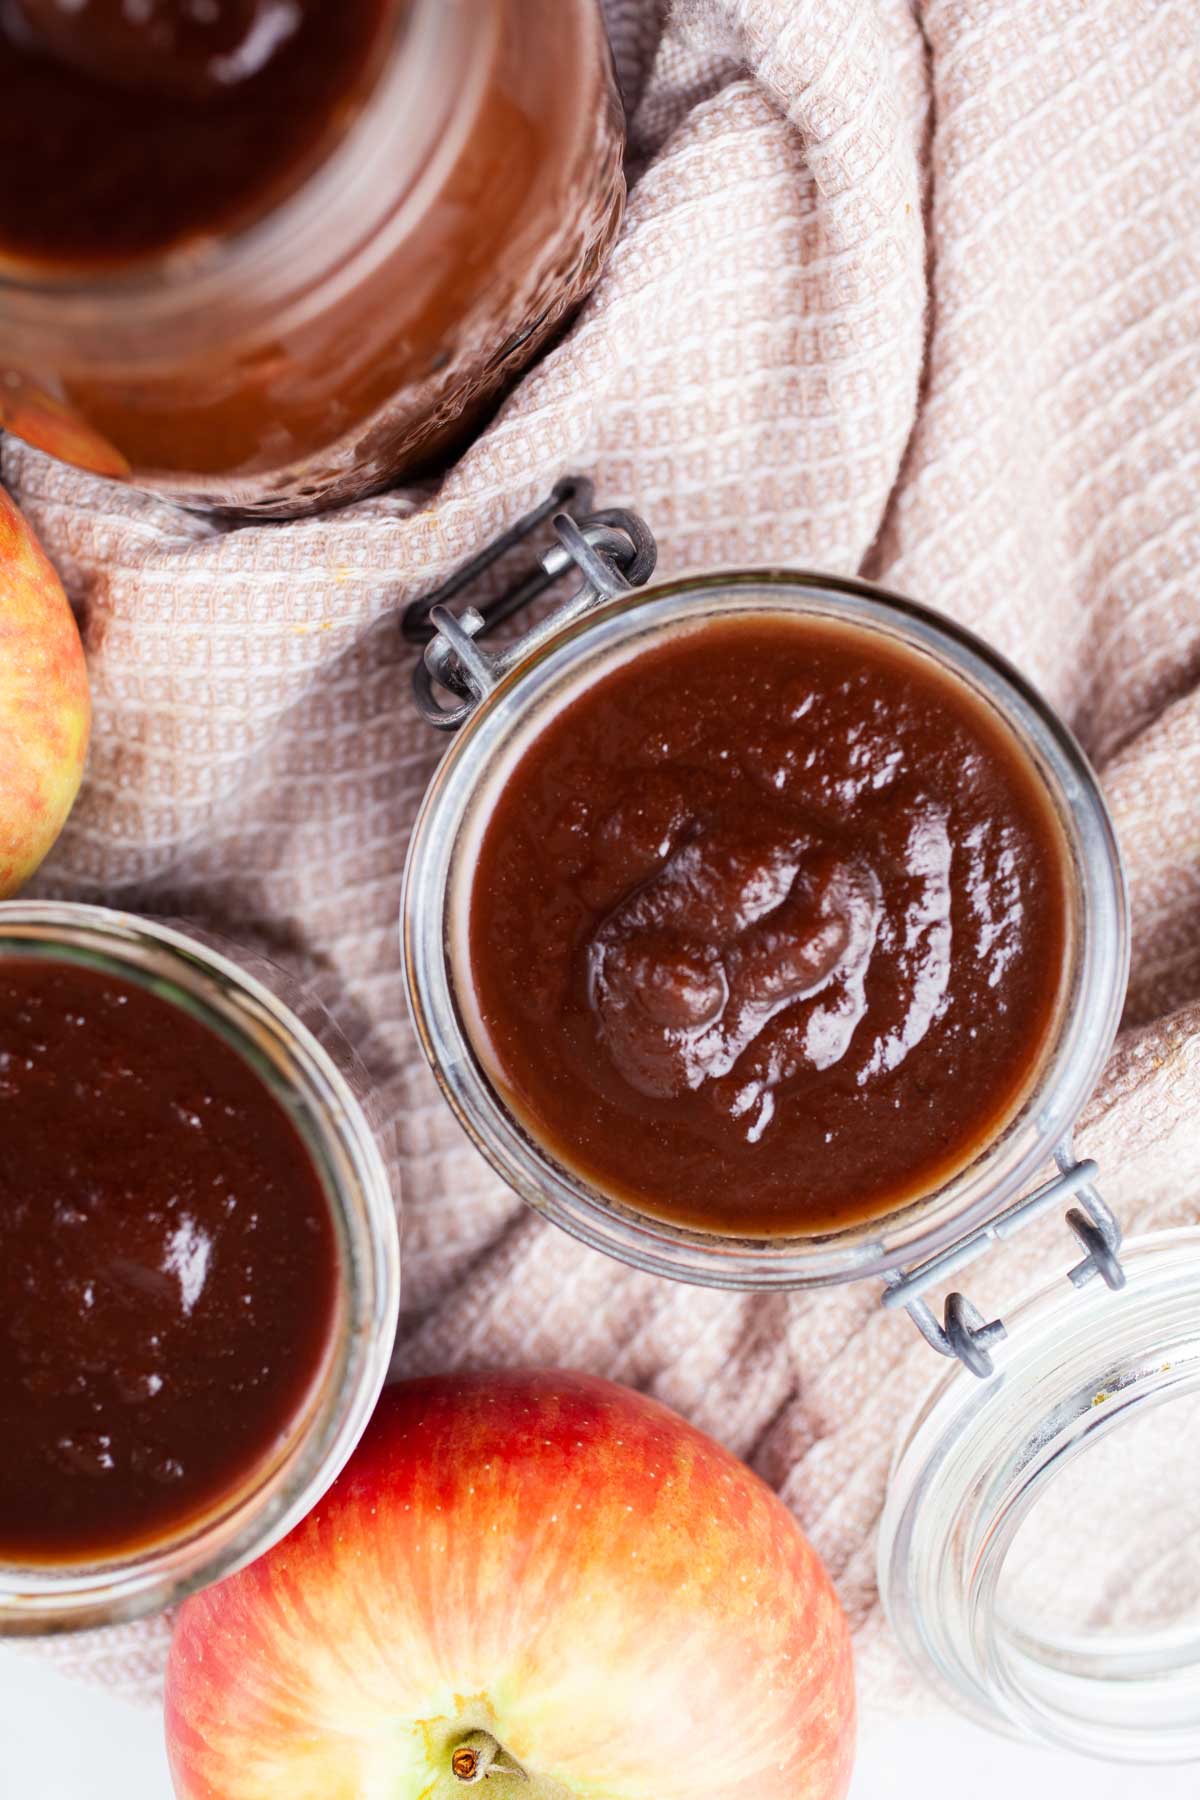 Apple butter stored in glass jars.